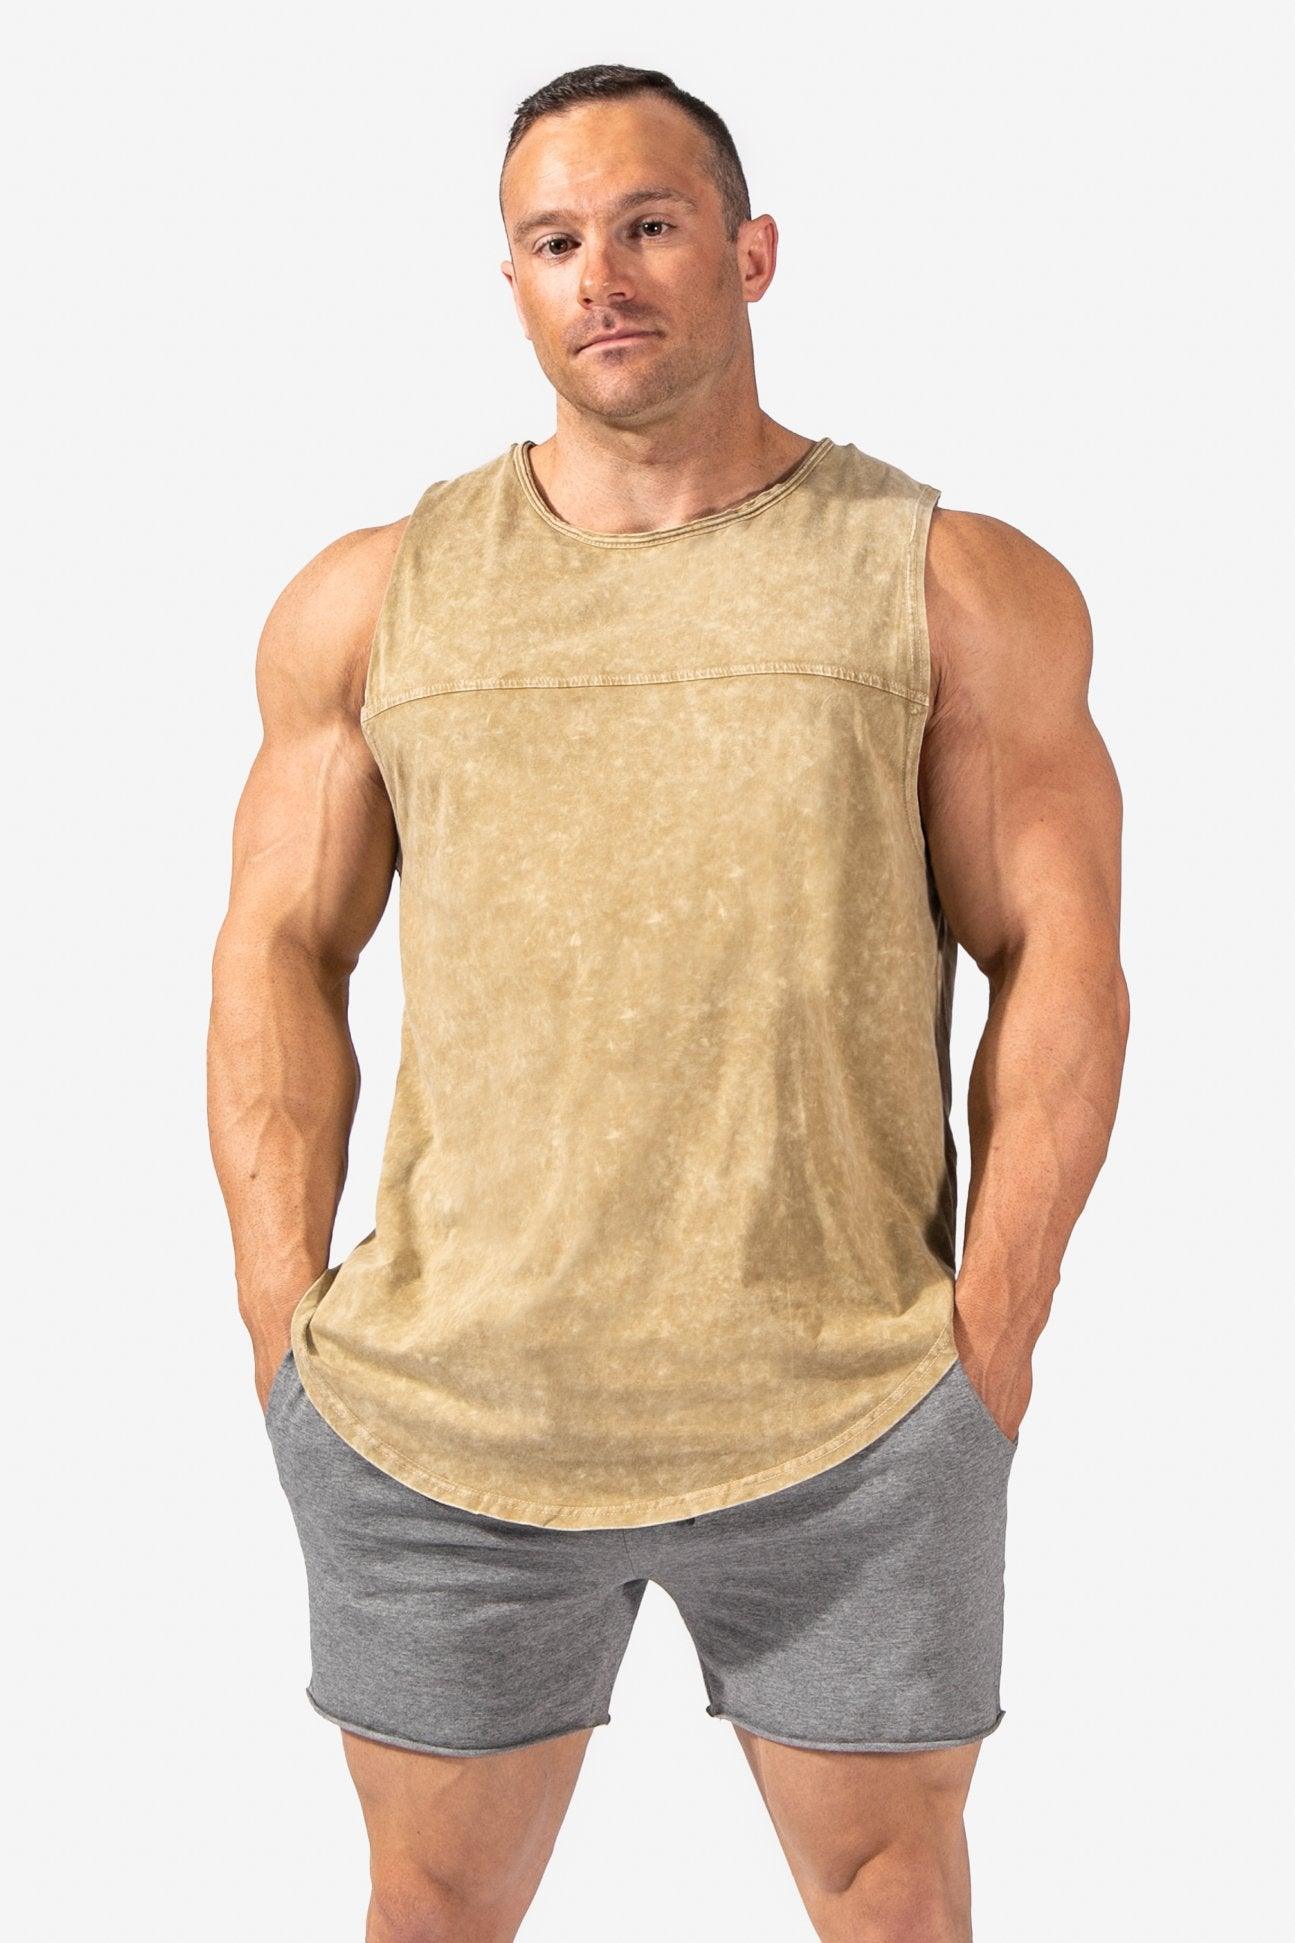 lv shirt - T-shirts & Singlets Prices and Promotions - Men Clothes